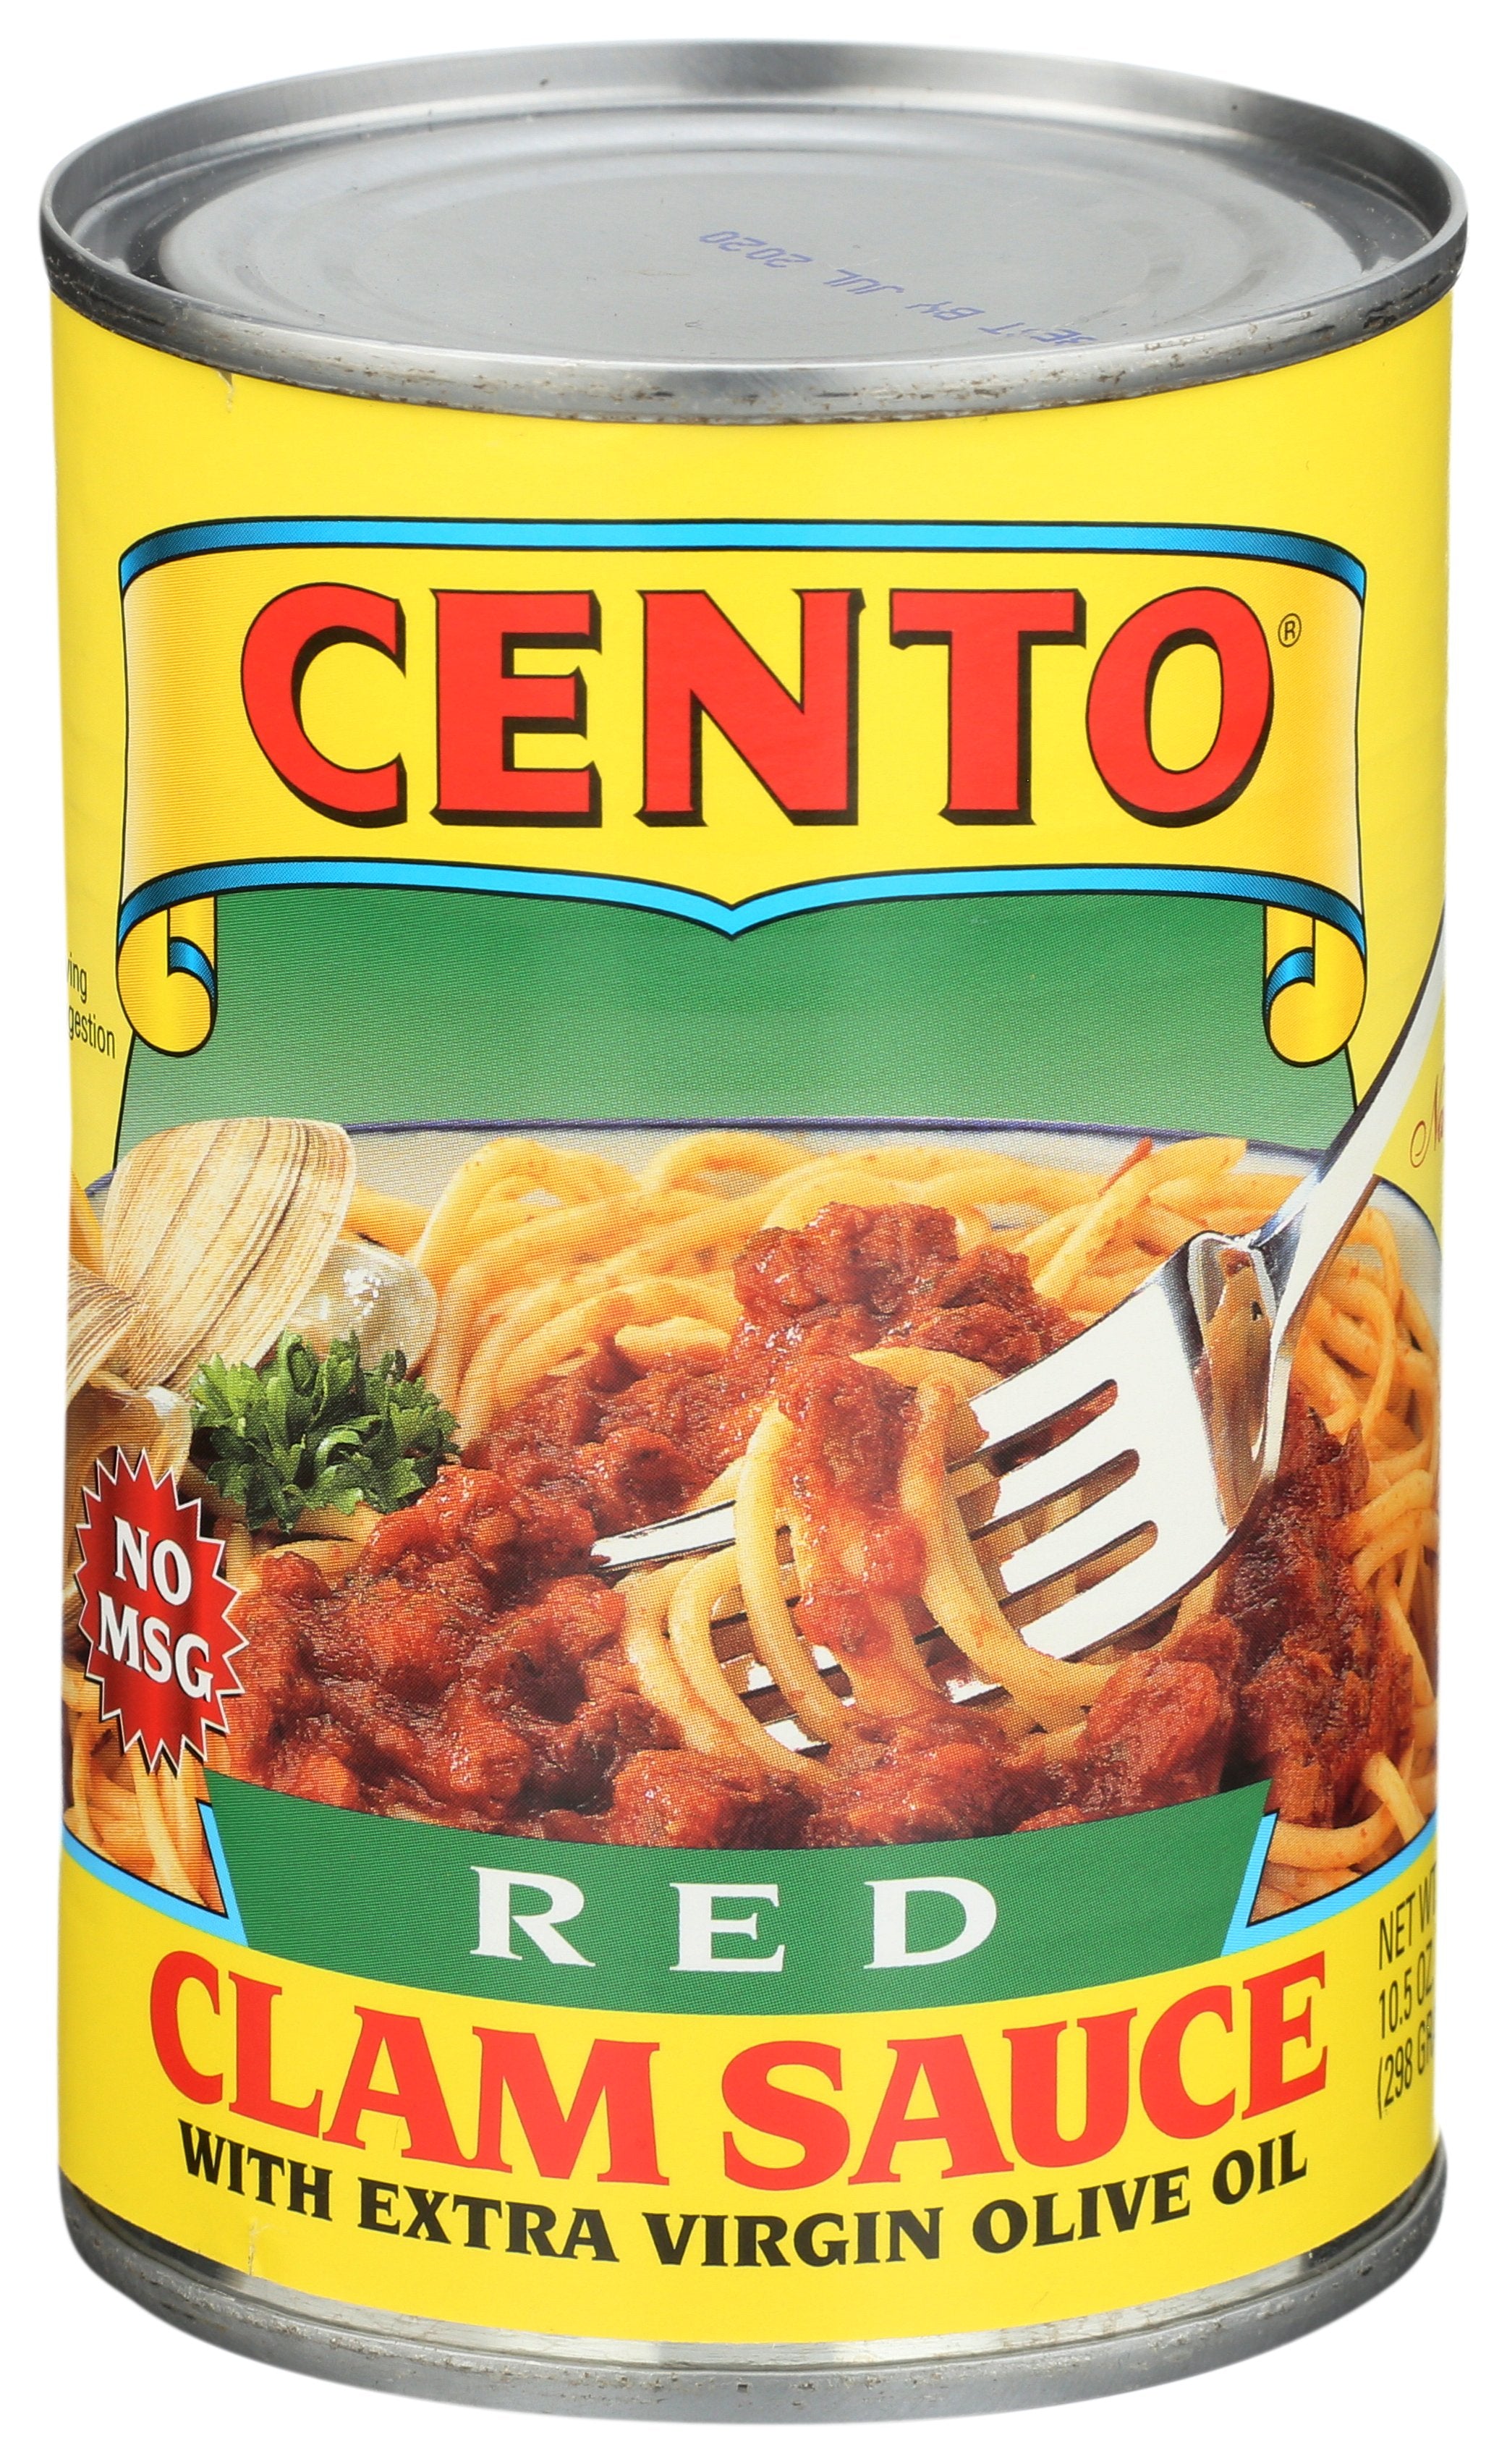 CENTO SAUCE CLAM RED - Case of 6